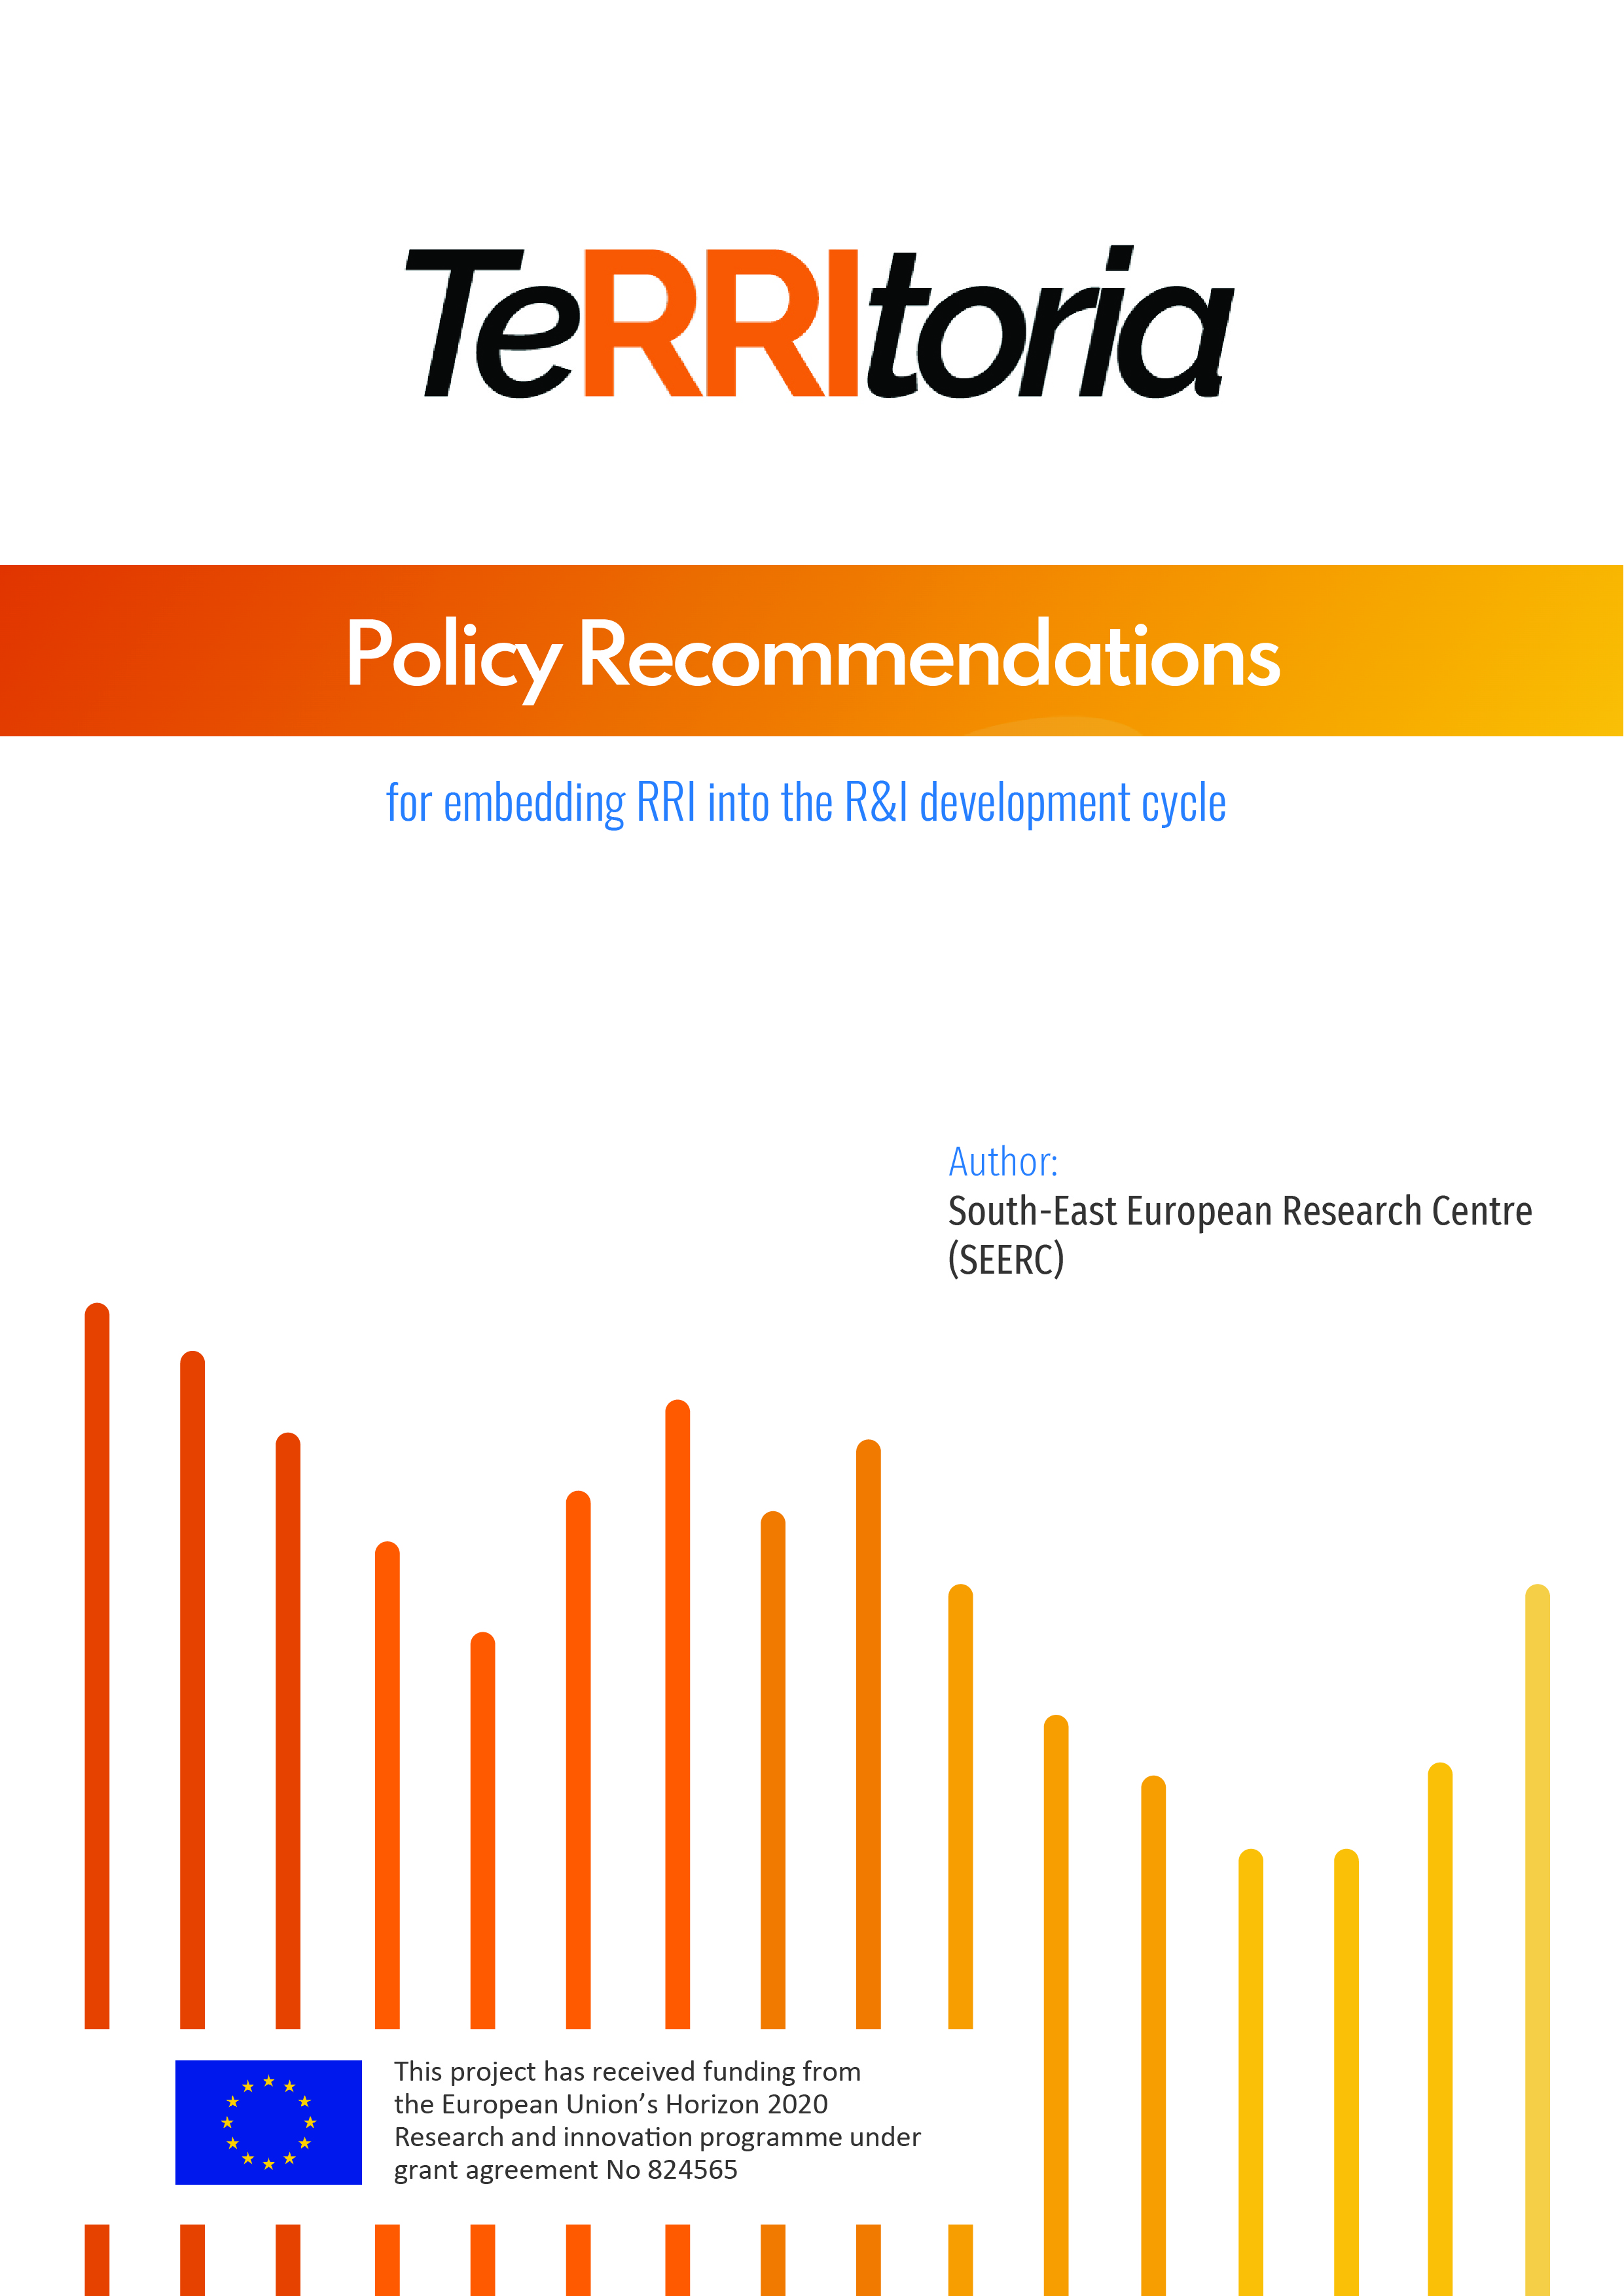 The TeRRItoria Policy Recommendations